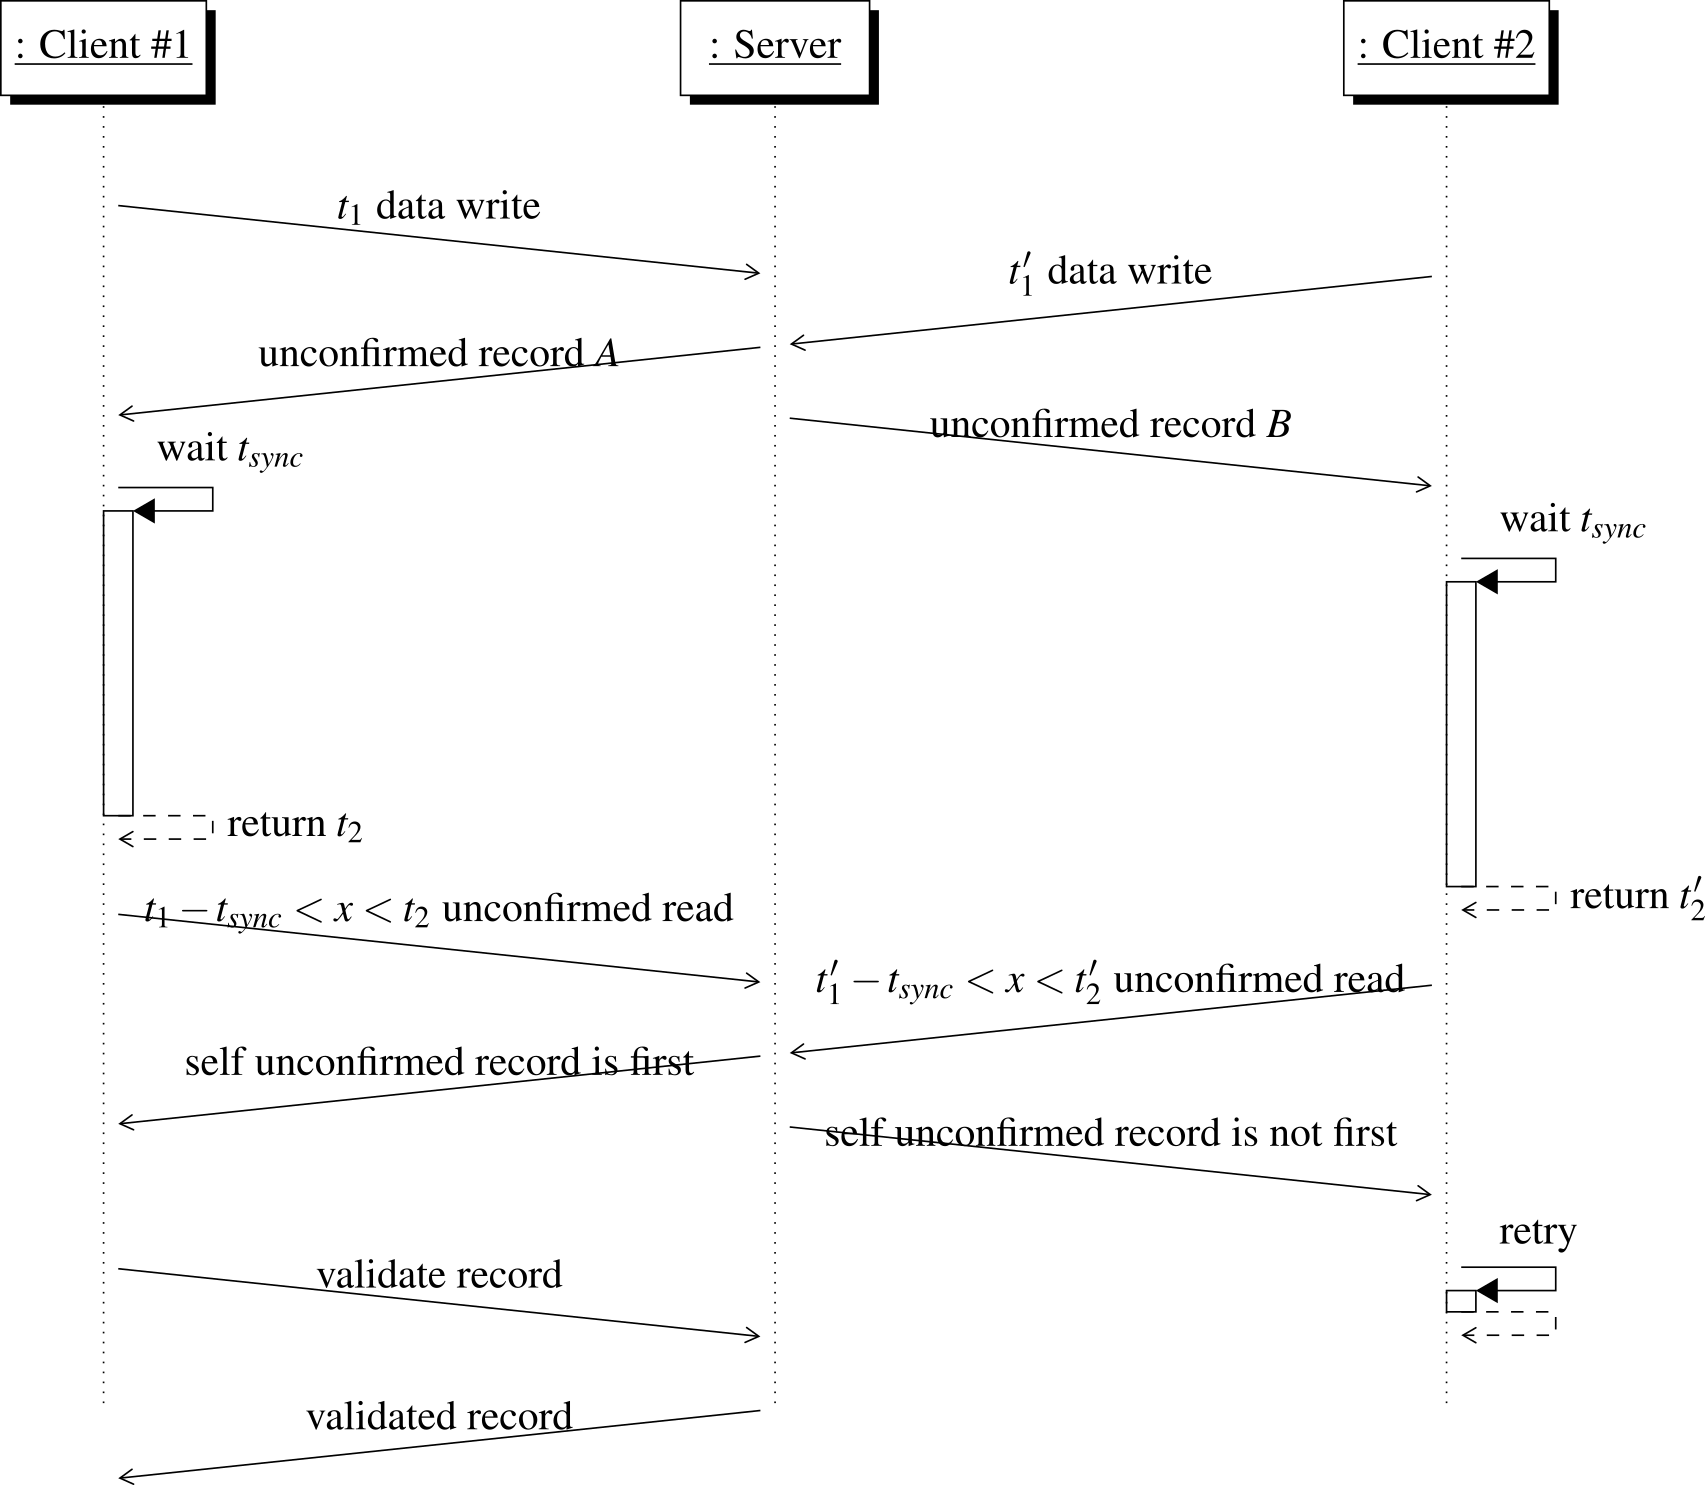 Sequence diagram showing that a transaction happening out of a time-frame of another transaction succeeds but if it happens in the time-frame it must be retried